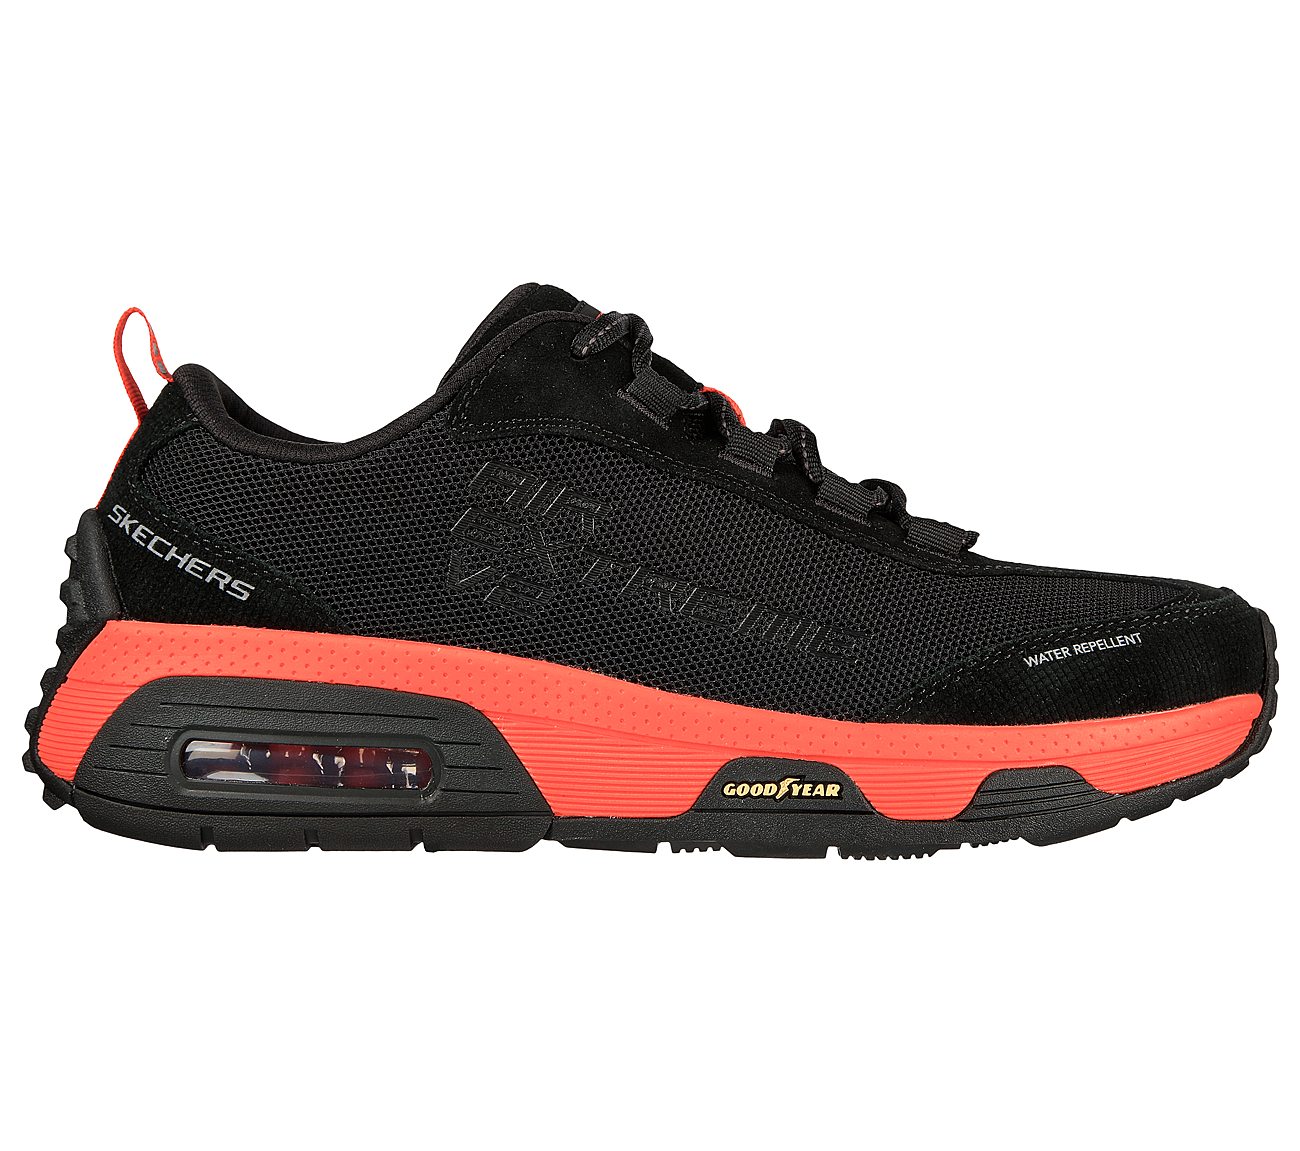 SKECH-AIR EXTREME V2 - BRAZEN, BLACK/RED Footwear Right View